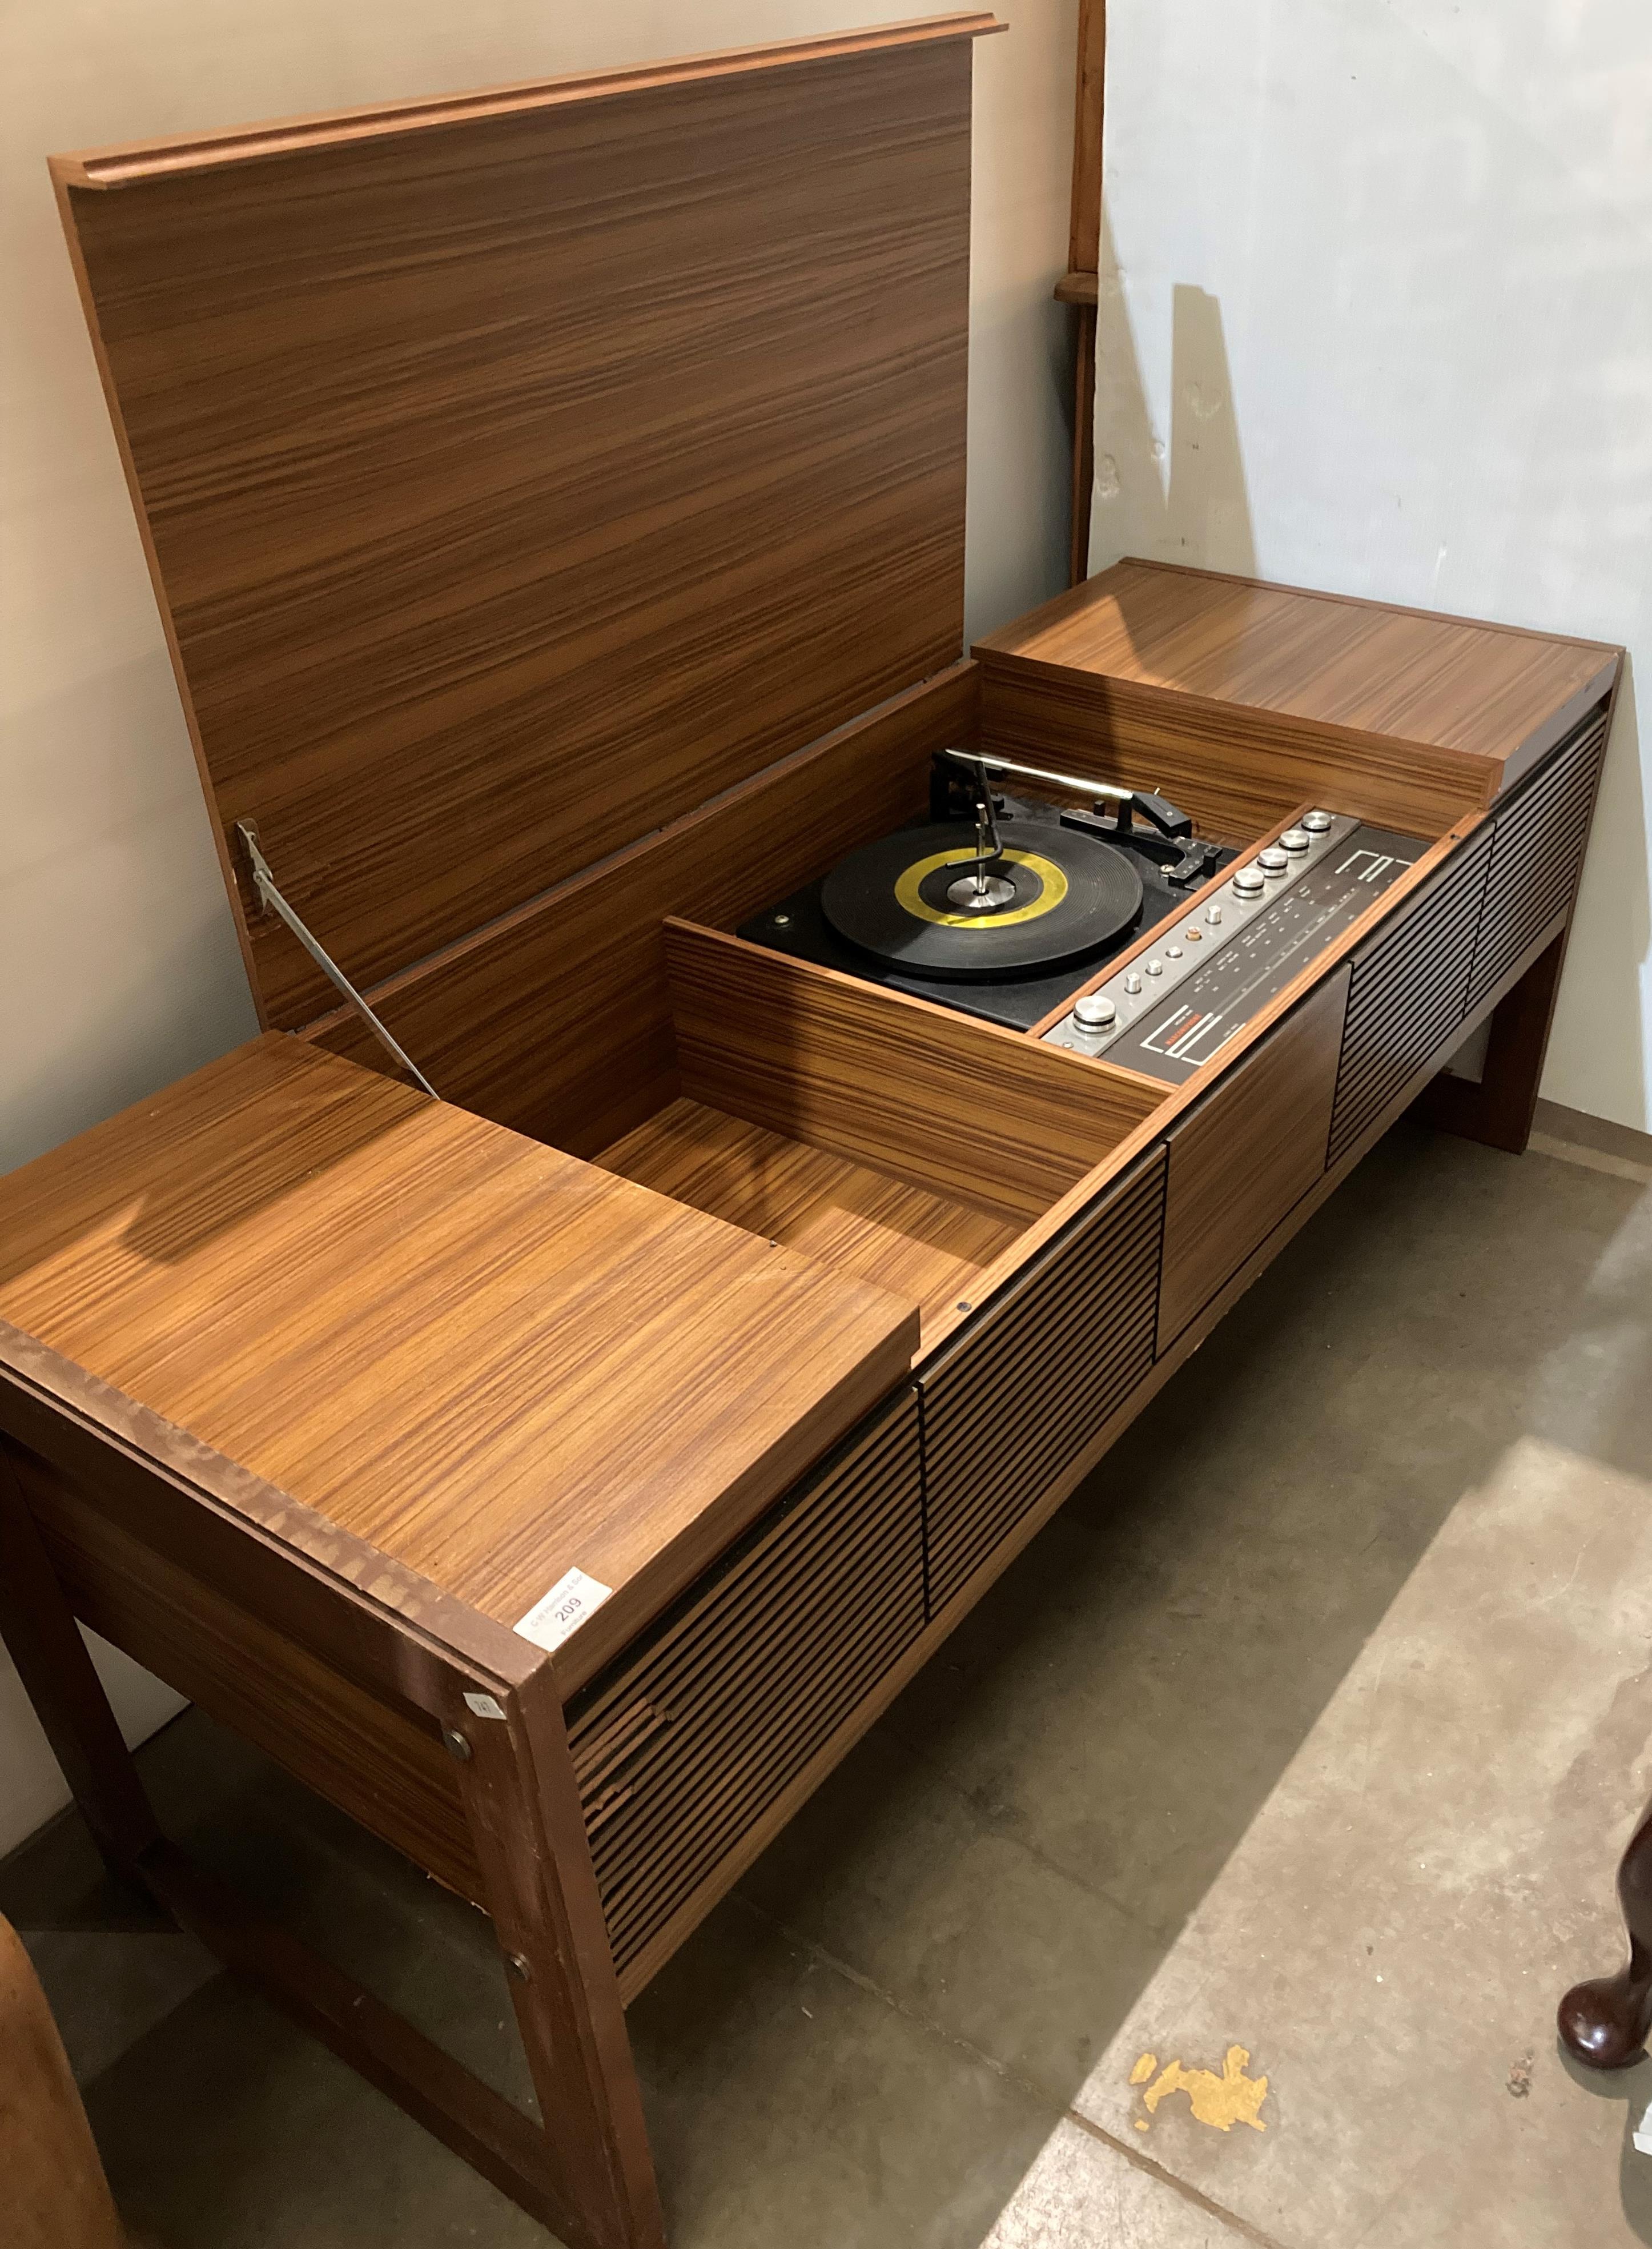 A teak finish Marconi Phone radiogram with deck and multi-band radio (failed PAT test),